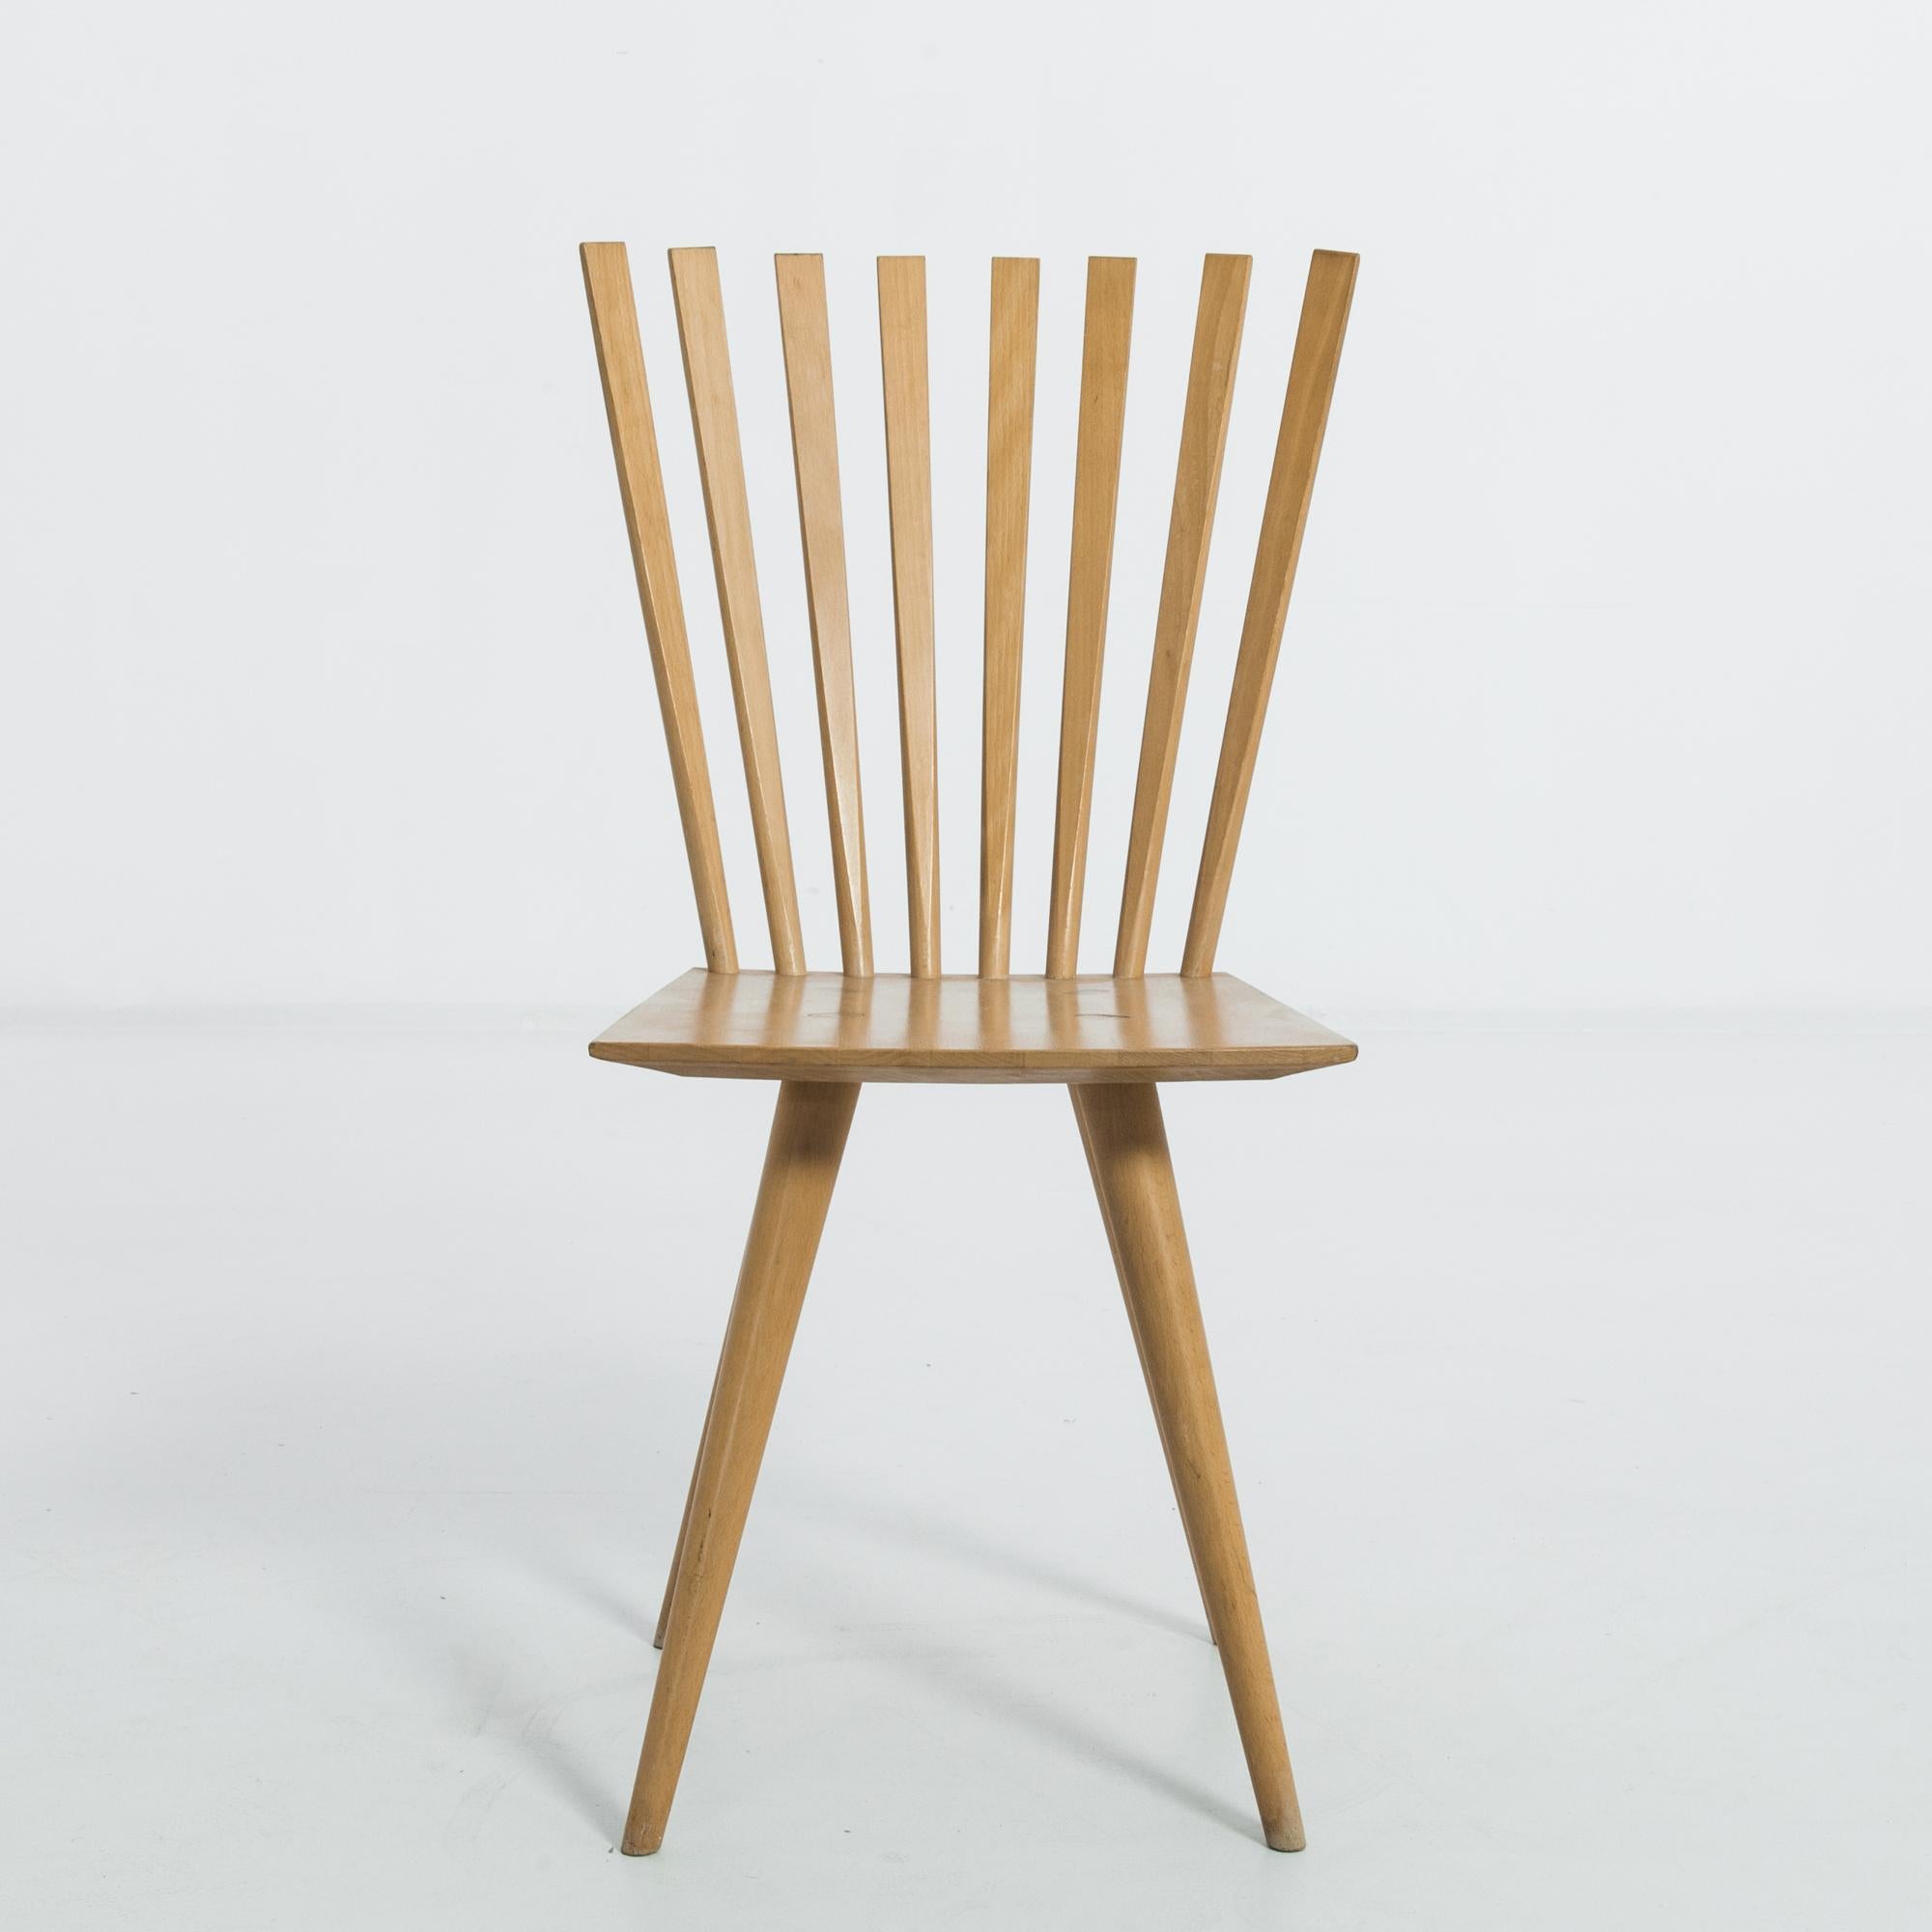 This pair of wooden chairs was made in Denmark, circa 1990. Designed by Johannes Foersom and Peter Hiort-Lorenzen, these ‘Mikado’ chairs were inspired by the English Windsor chair, which was constructed based on the idea of the seat joining all the